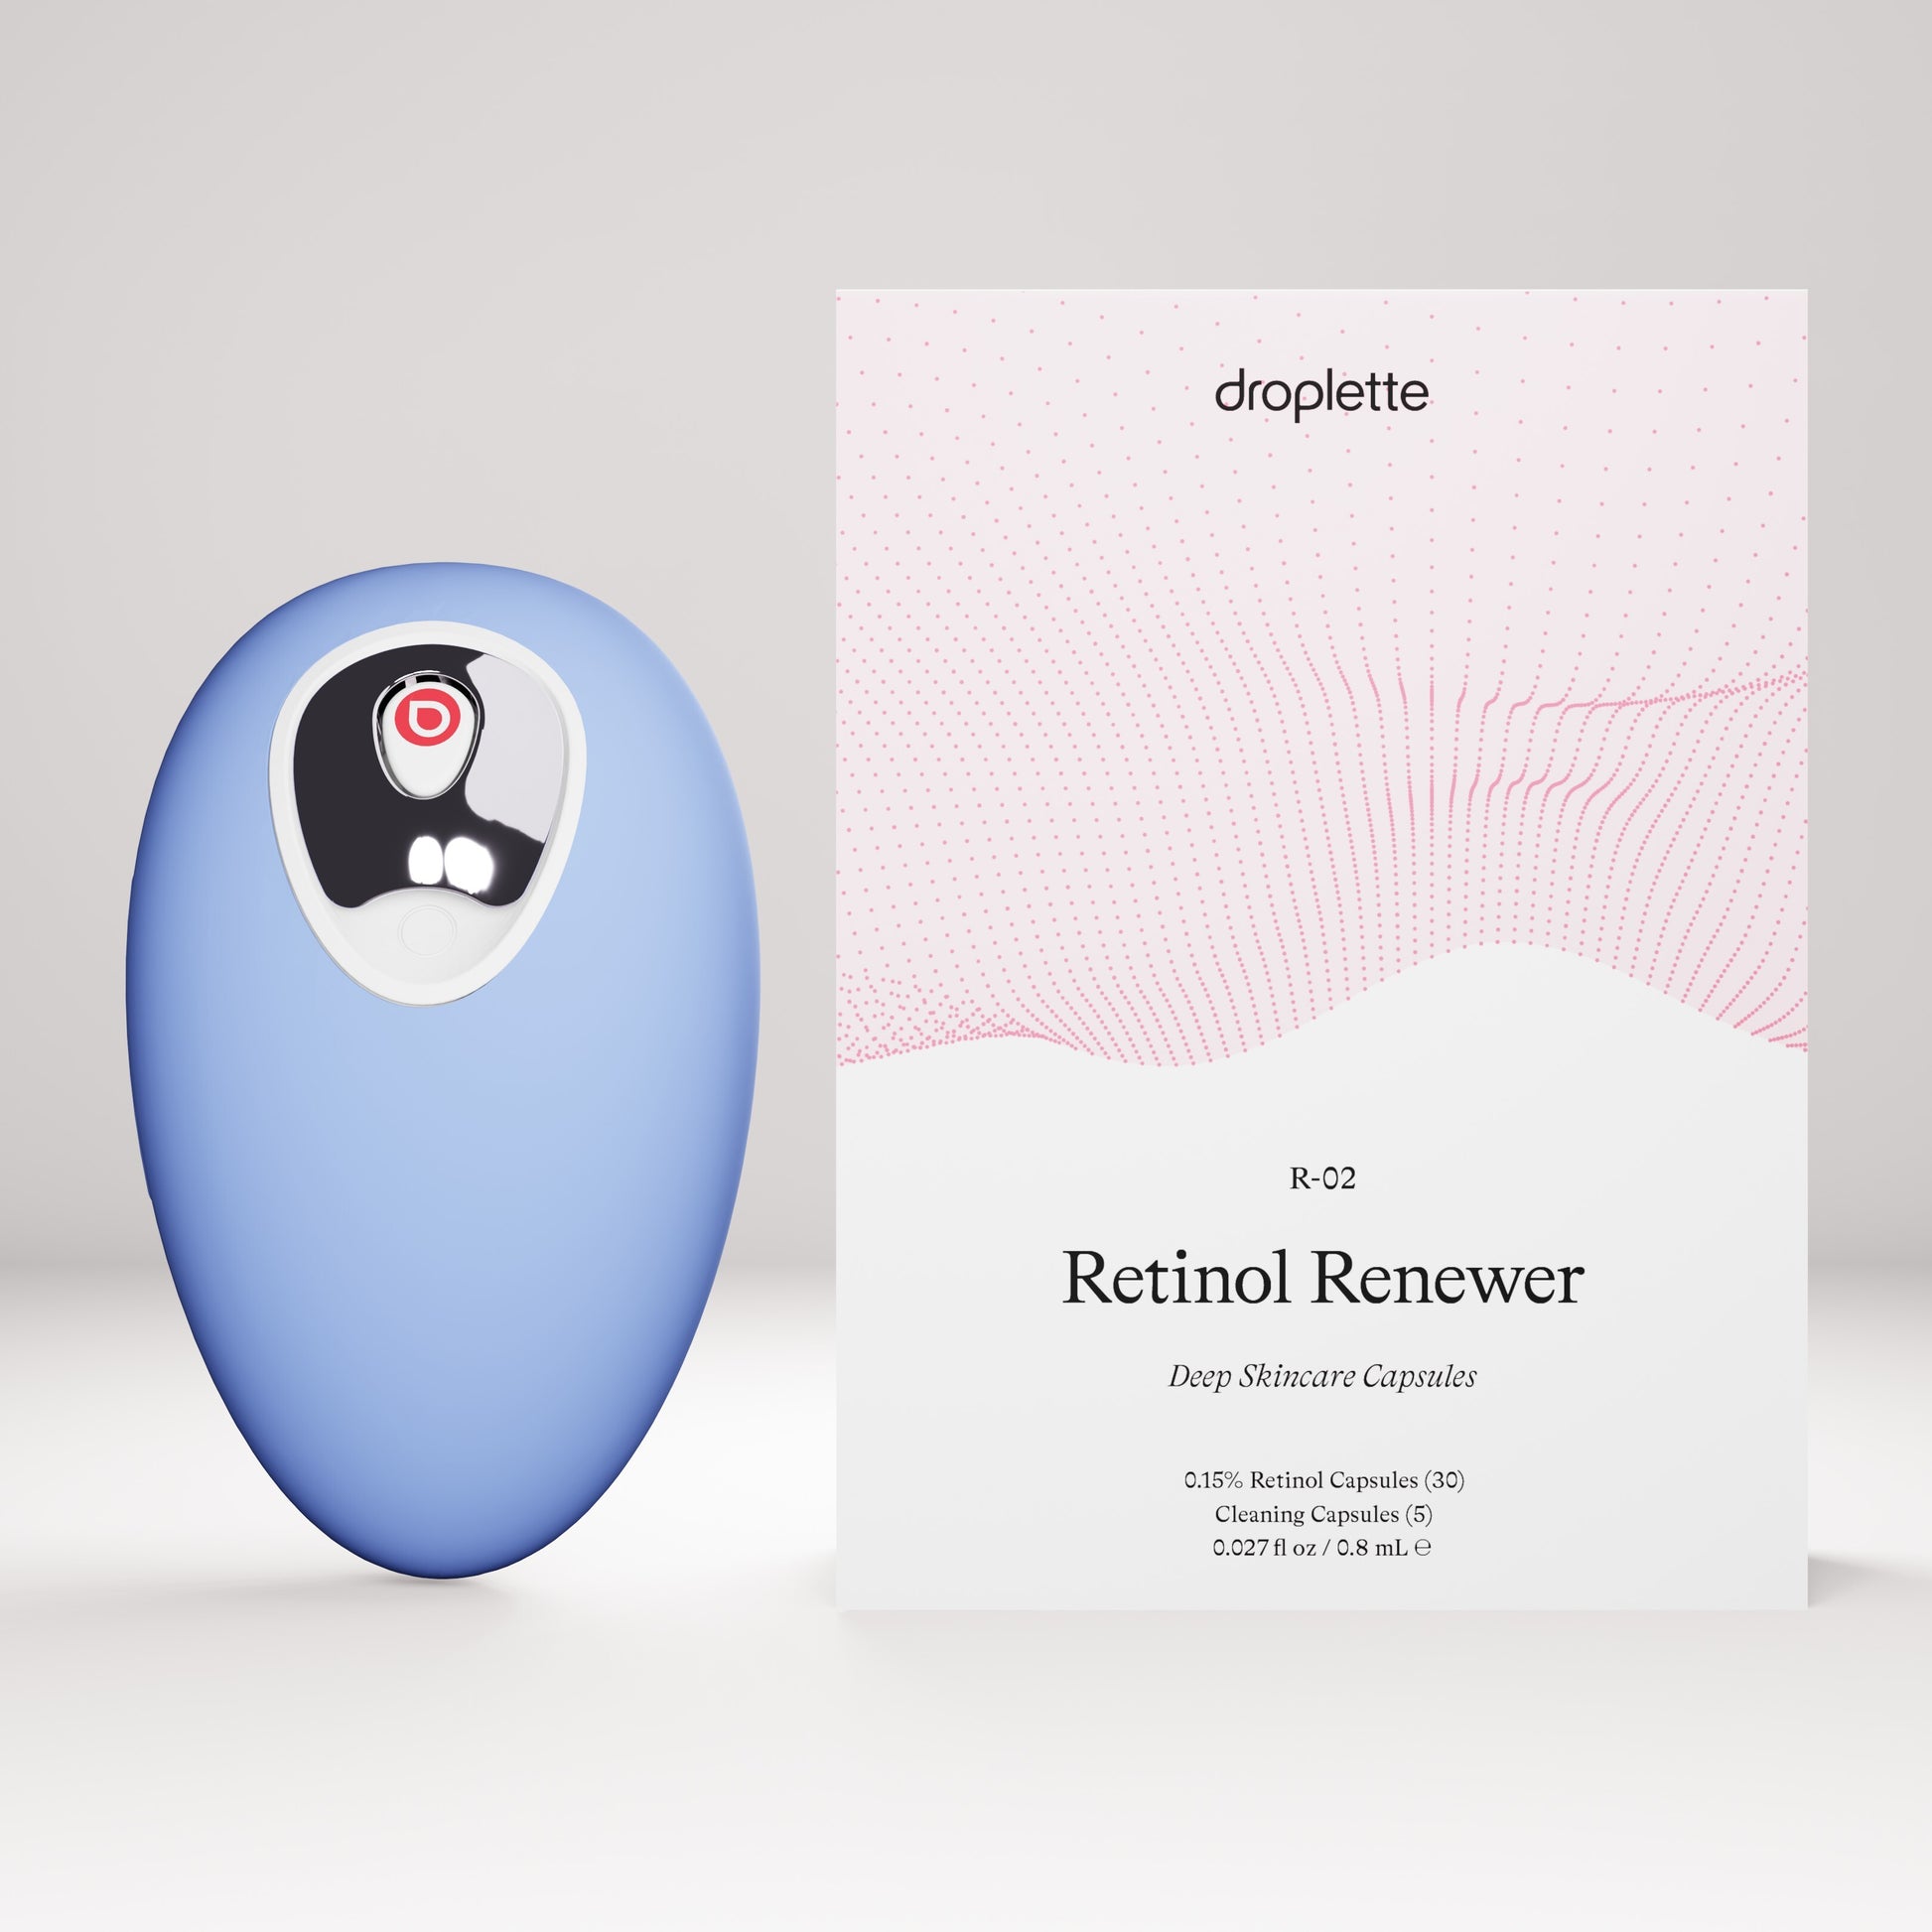 Classic Iris Droplette Device sits beside a 30 capsule sized box of Droplette's Retinol Renewer capsules